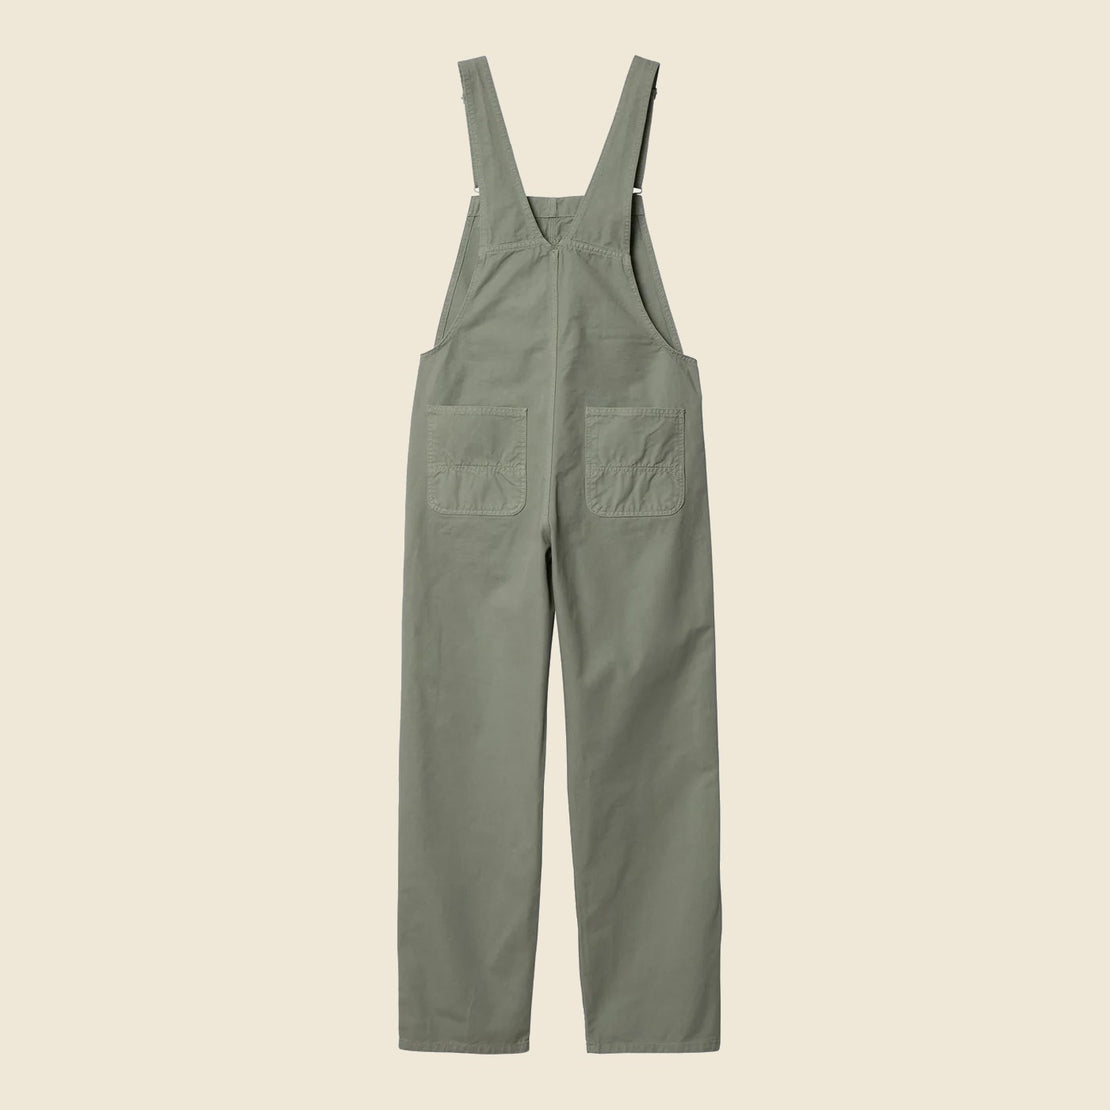 Bib Overall Straight - Yucca - Carhartt WIP - STAG Provisions - W - Onepiece - Overalls